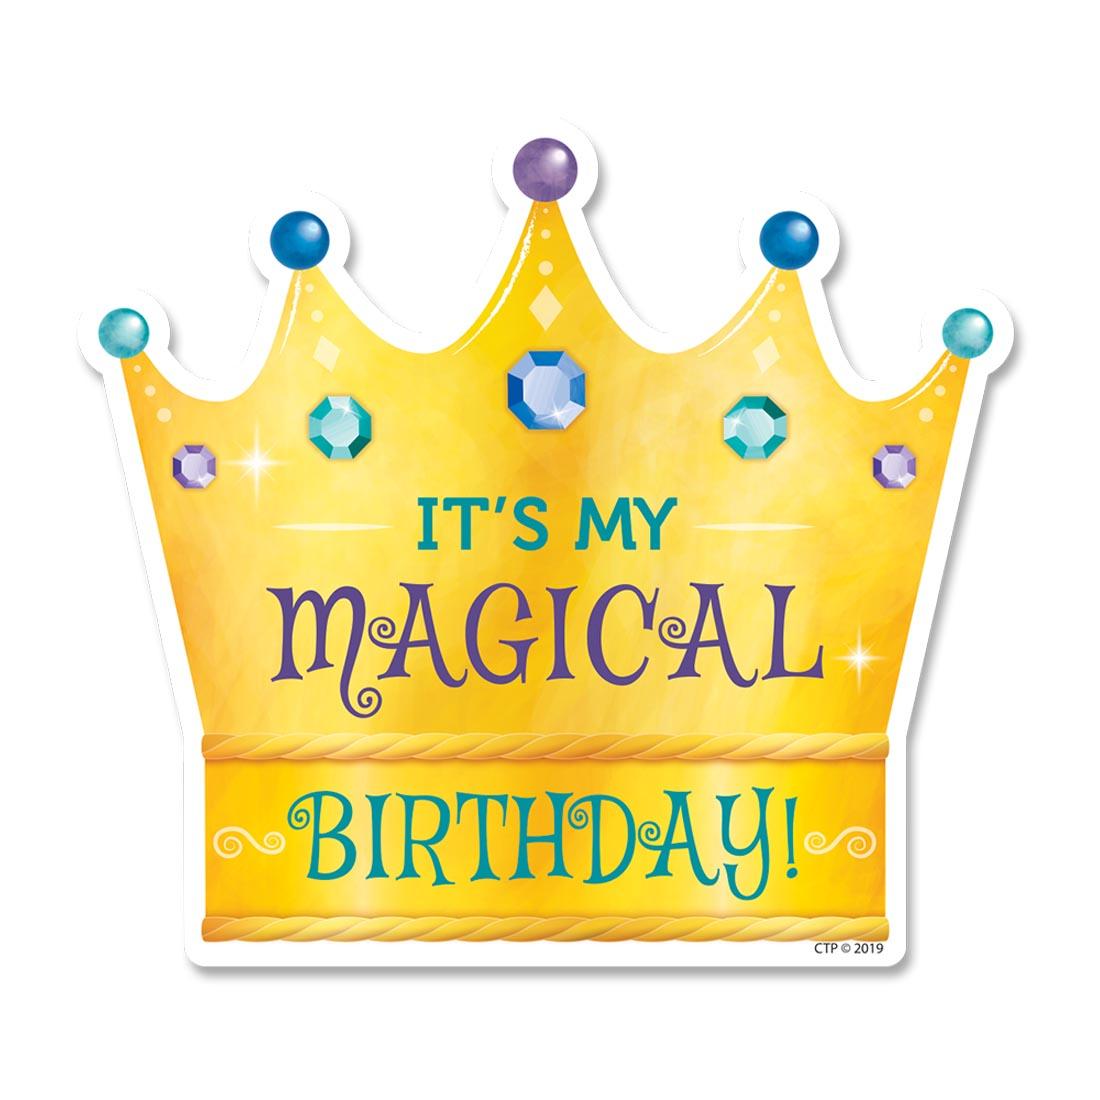 It's My Magical Birthday Badge from the Mystical Magical collection by Creative Teaching Press